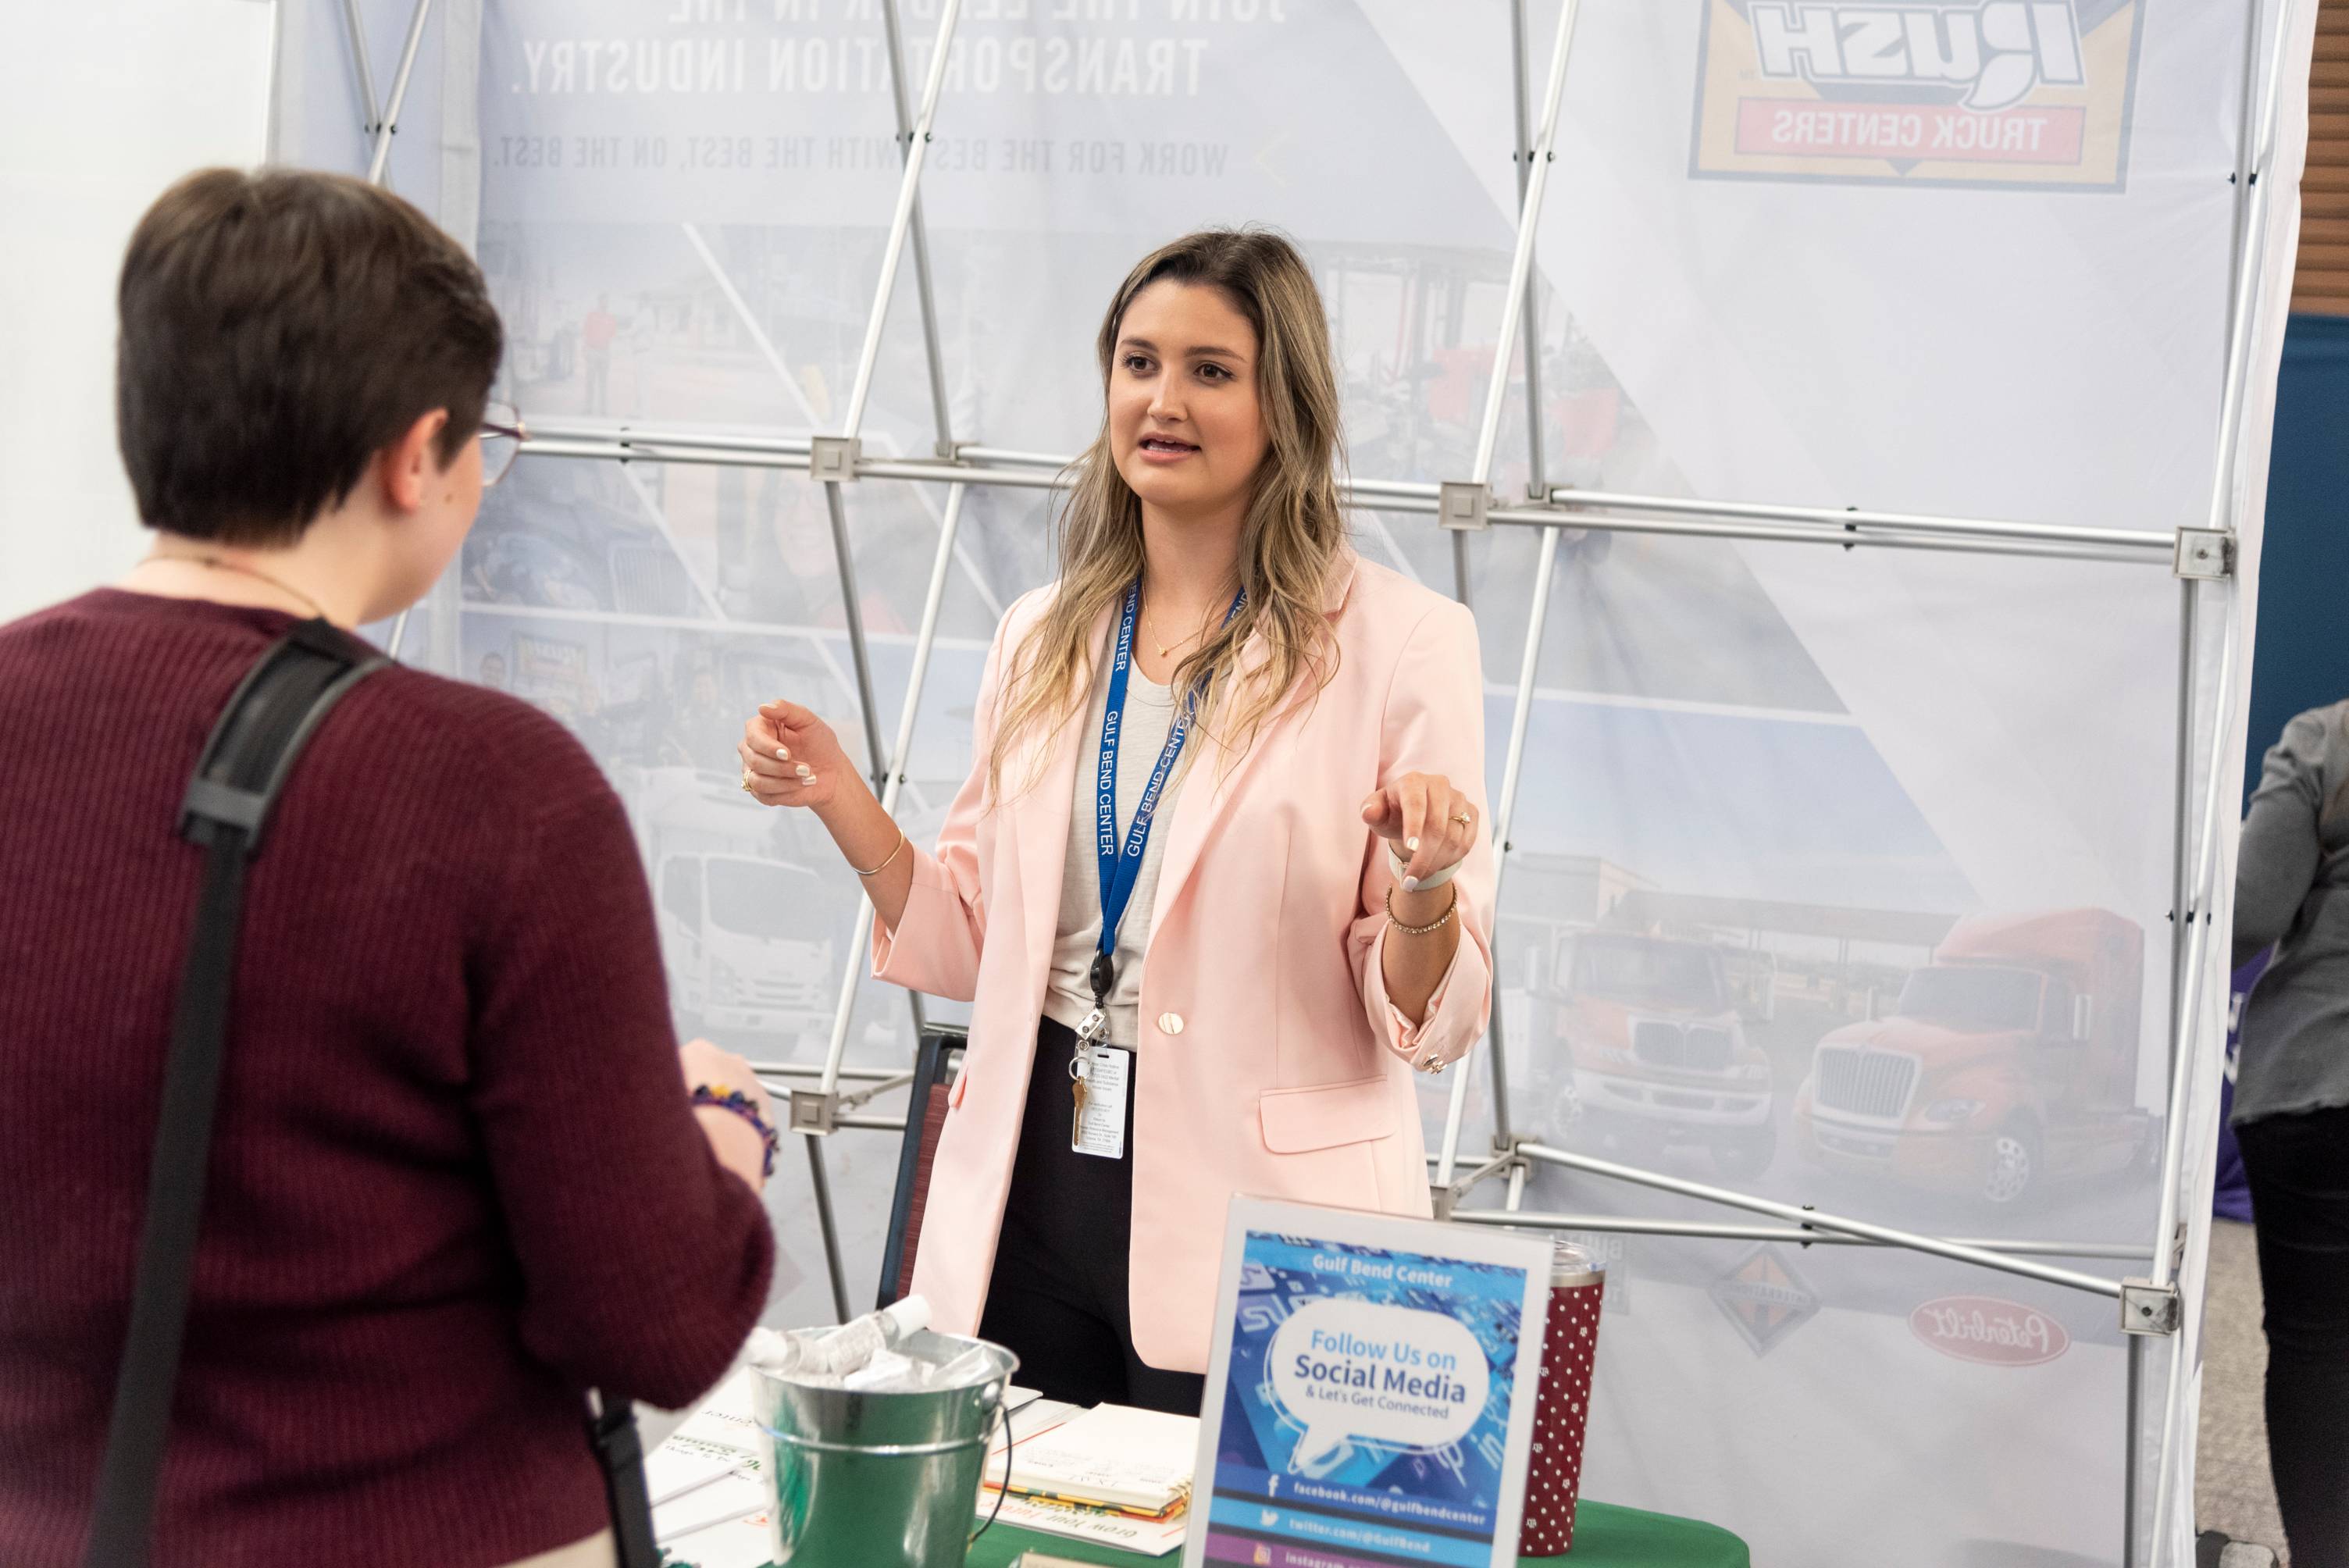 A recruiters speaking to a student at a career fair booth